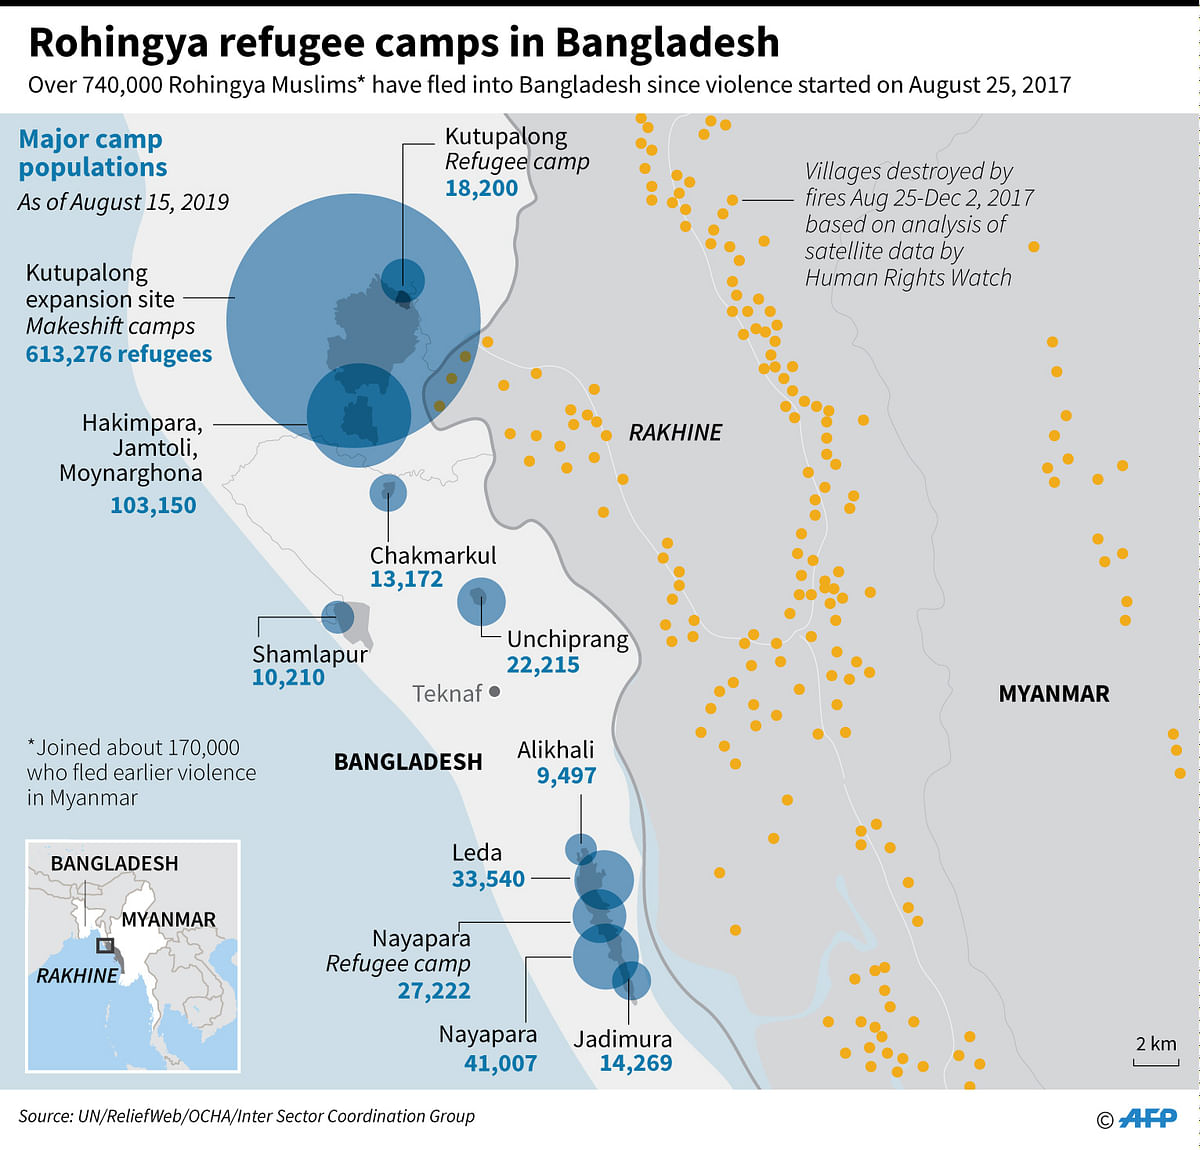 Major Rohingya refugee camp populations in Bangladesh, as of 15 August 2019. Photo: AFP